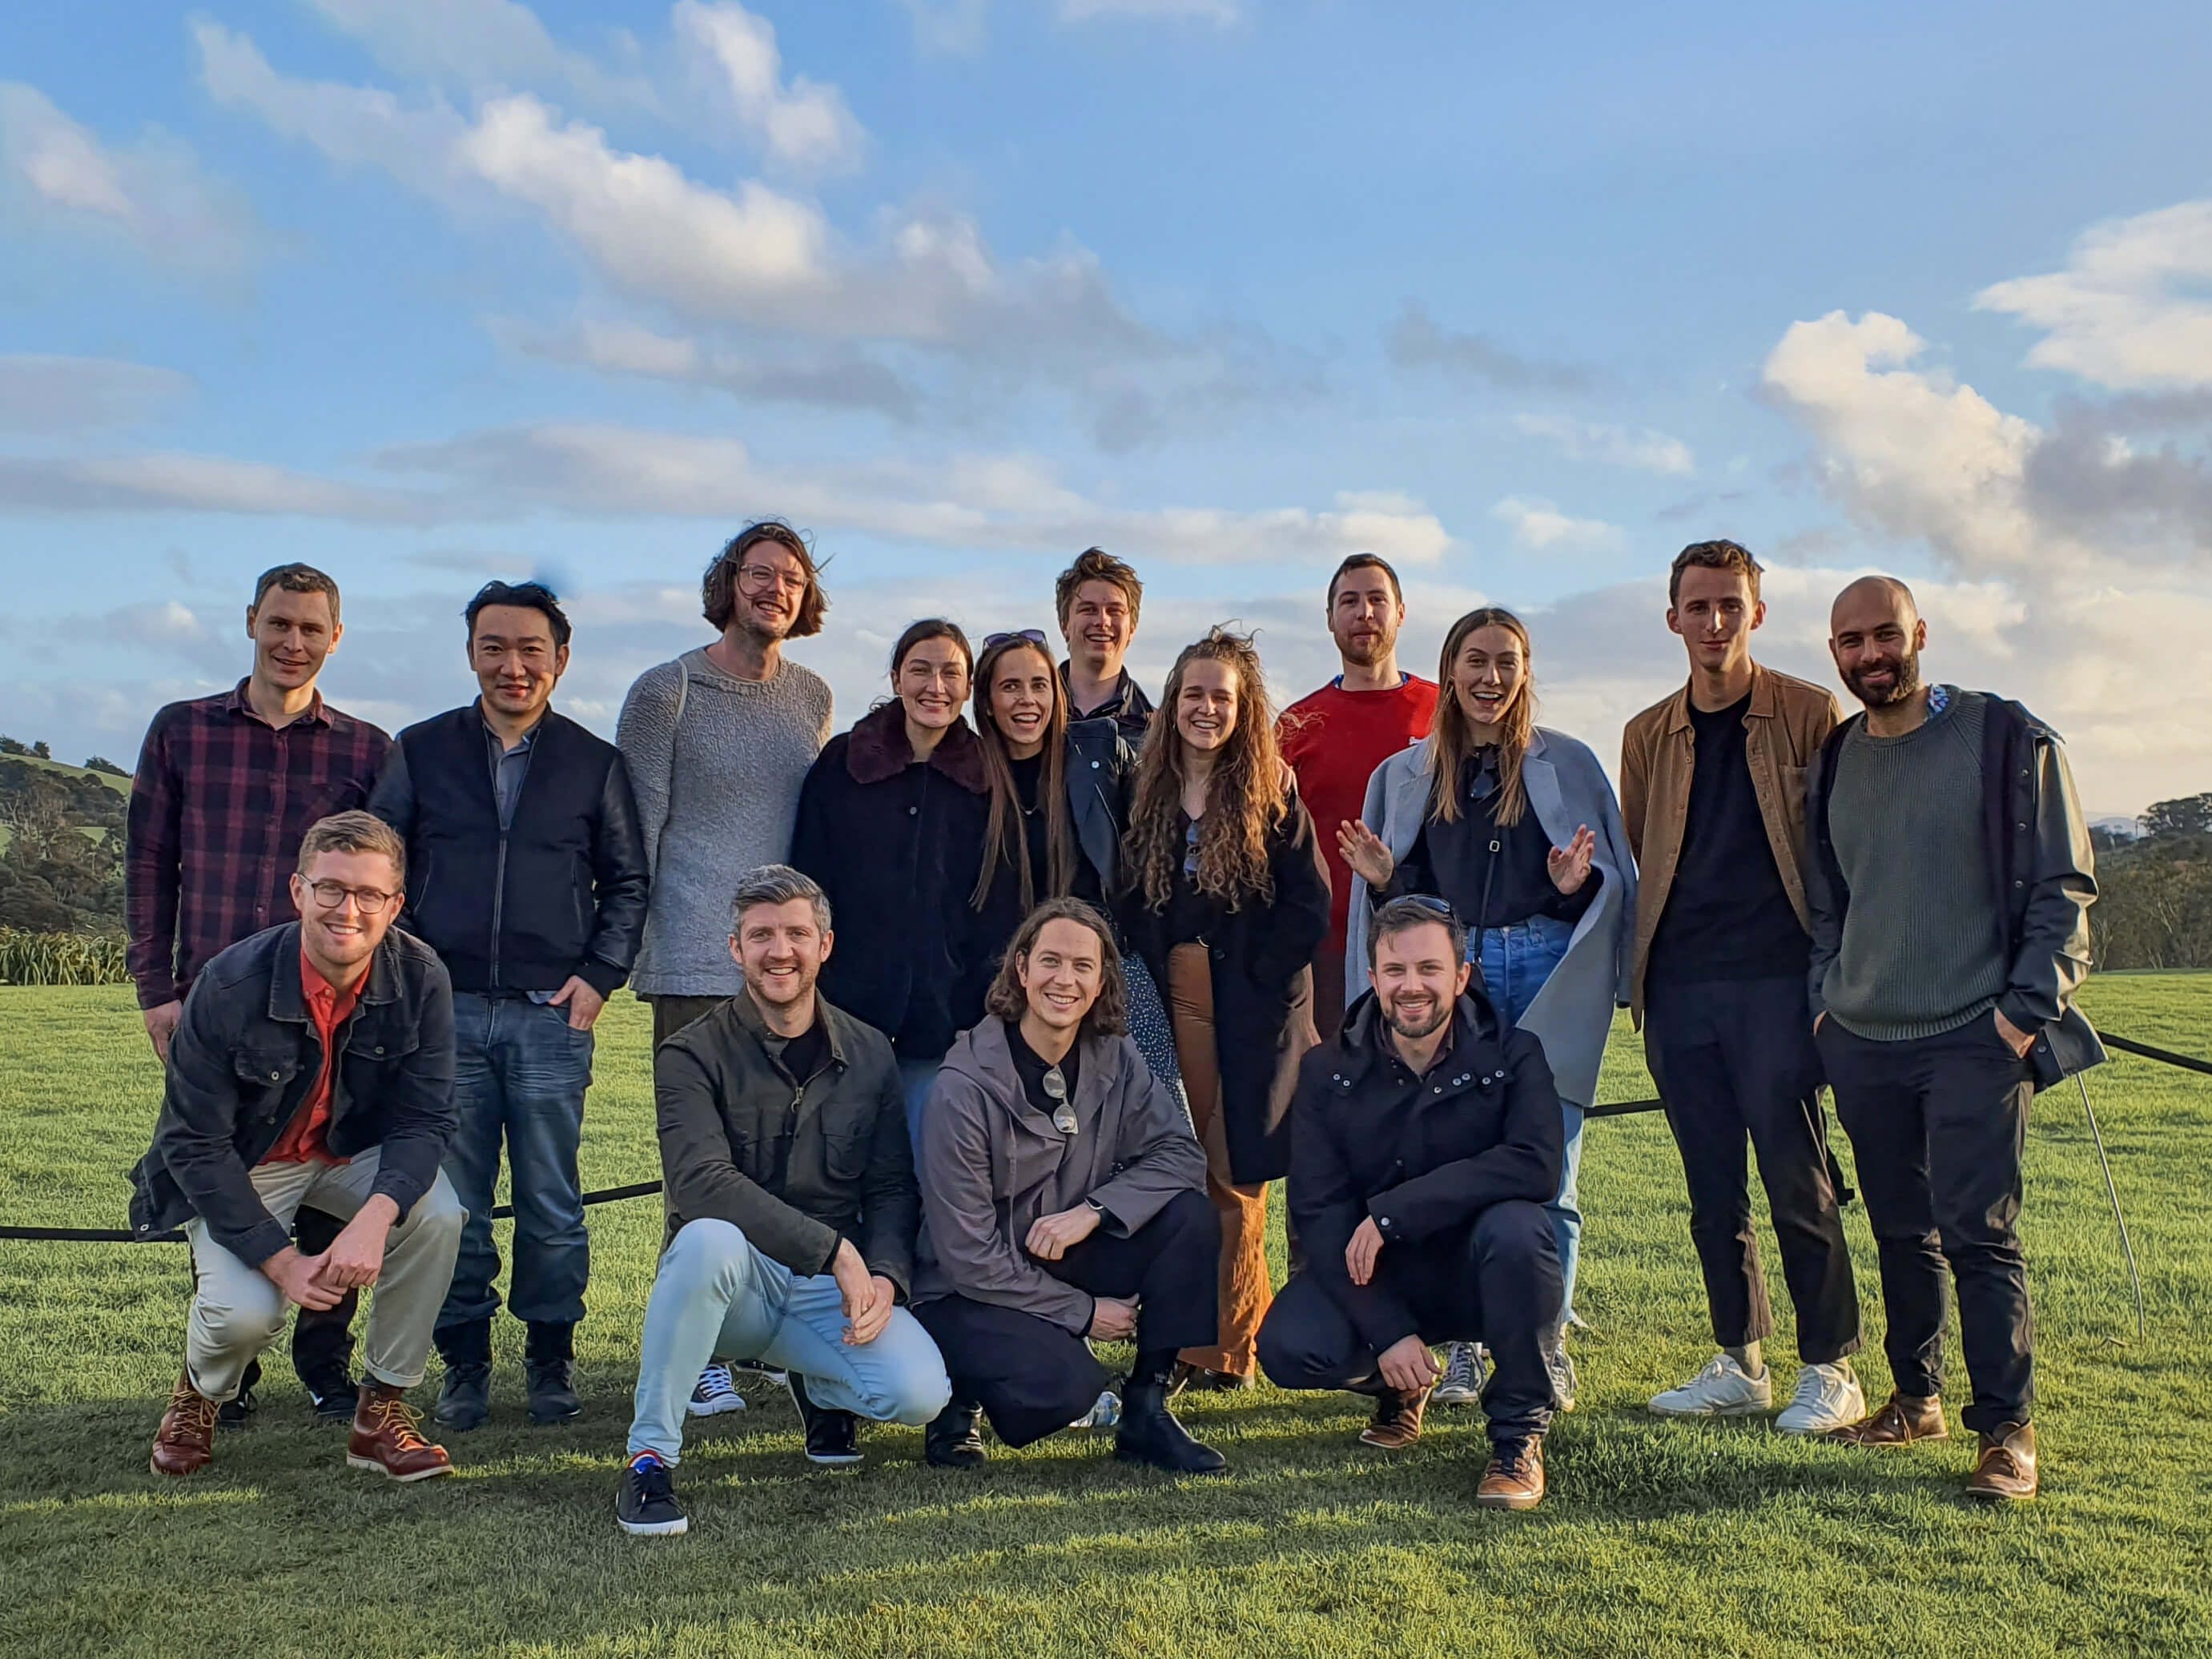 Come join the Narrative team in New Zealand!